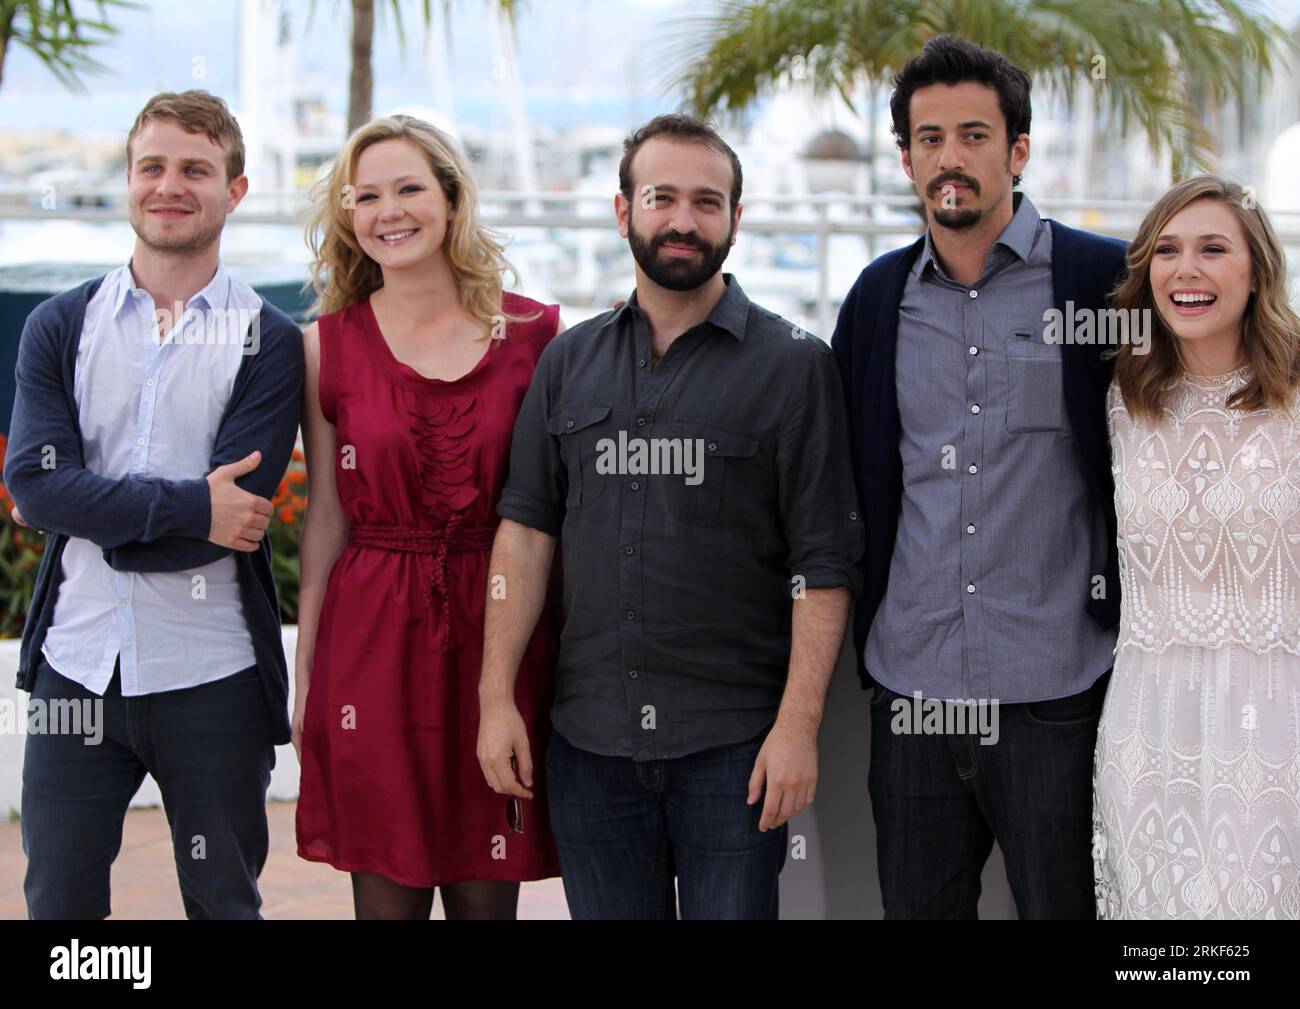 Bildnummer: 55349493  Datum: 15.05.2011  Copyright: imago/Xinhua CANNES, May 15, 2011 (Xinhua) -- (From L to R) U.S. director Sean Durkin, actresses Louisa Krause, Portuguese producer Antonio Campos, U.S. producer Josh Mond and U.S actress Elisabeth Olsen pose during the photocall of Martha Marcy May Marlene at the 64th Cannes Film Festival in Cannes, France, on May 15, 2011. (Xinhua/Gao Jing) (msq) FRANCE-CANNES-FILM-FESTIVAL-MARTHA MARCY MAY MARLENE PUBLICATIONxNOTxINxCHN Kultur Entertainment People Film 64. Internationale Filmfestspiele Cannes Photocall kbdig xsk 2011 quer    Bildnummer 553 Stock Photo